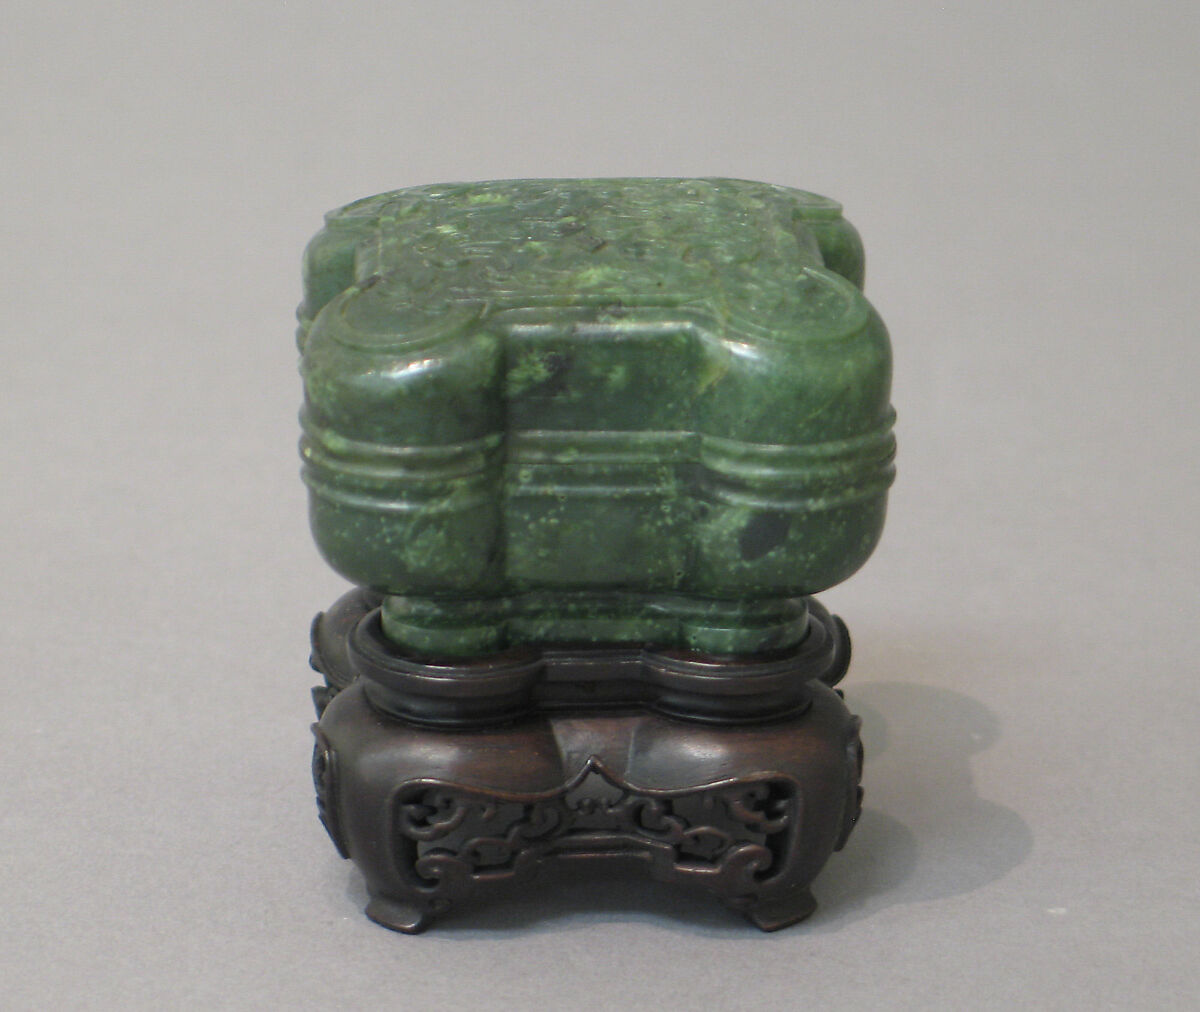 Box with cover, Nephrite, mottled spinach-green, China 